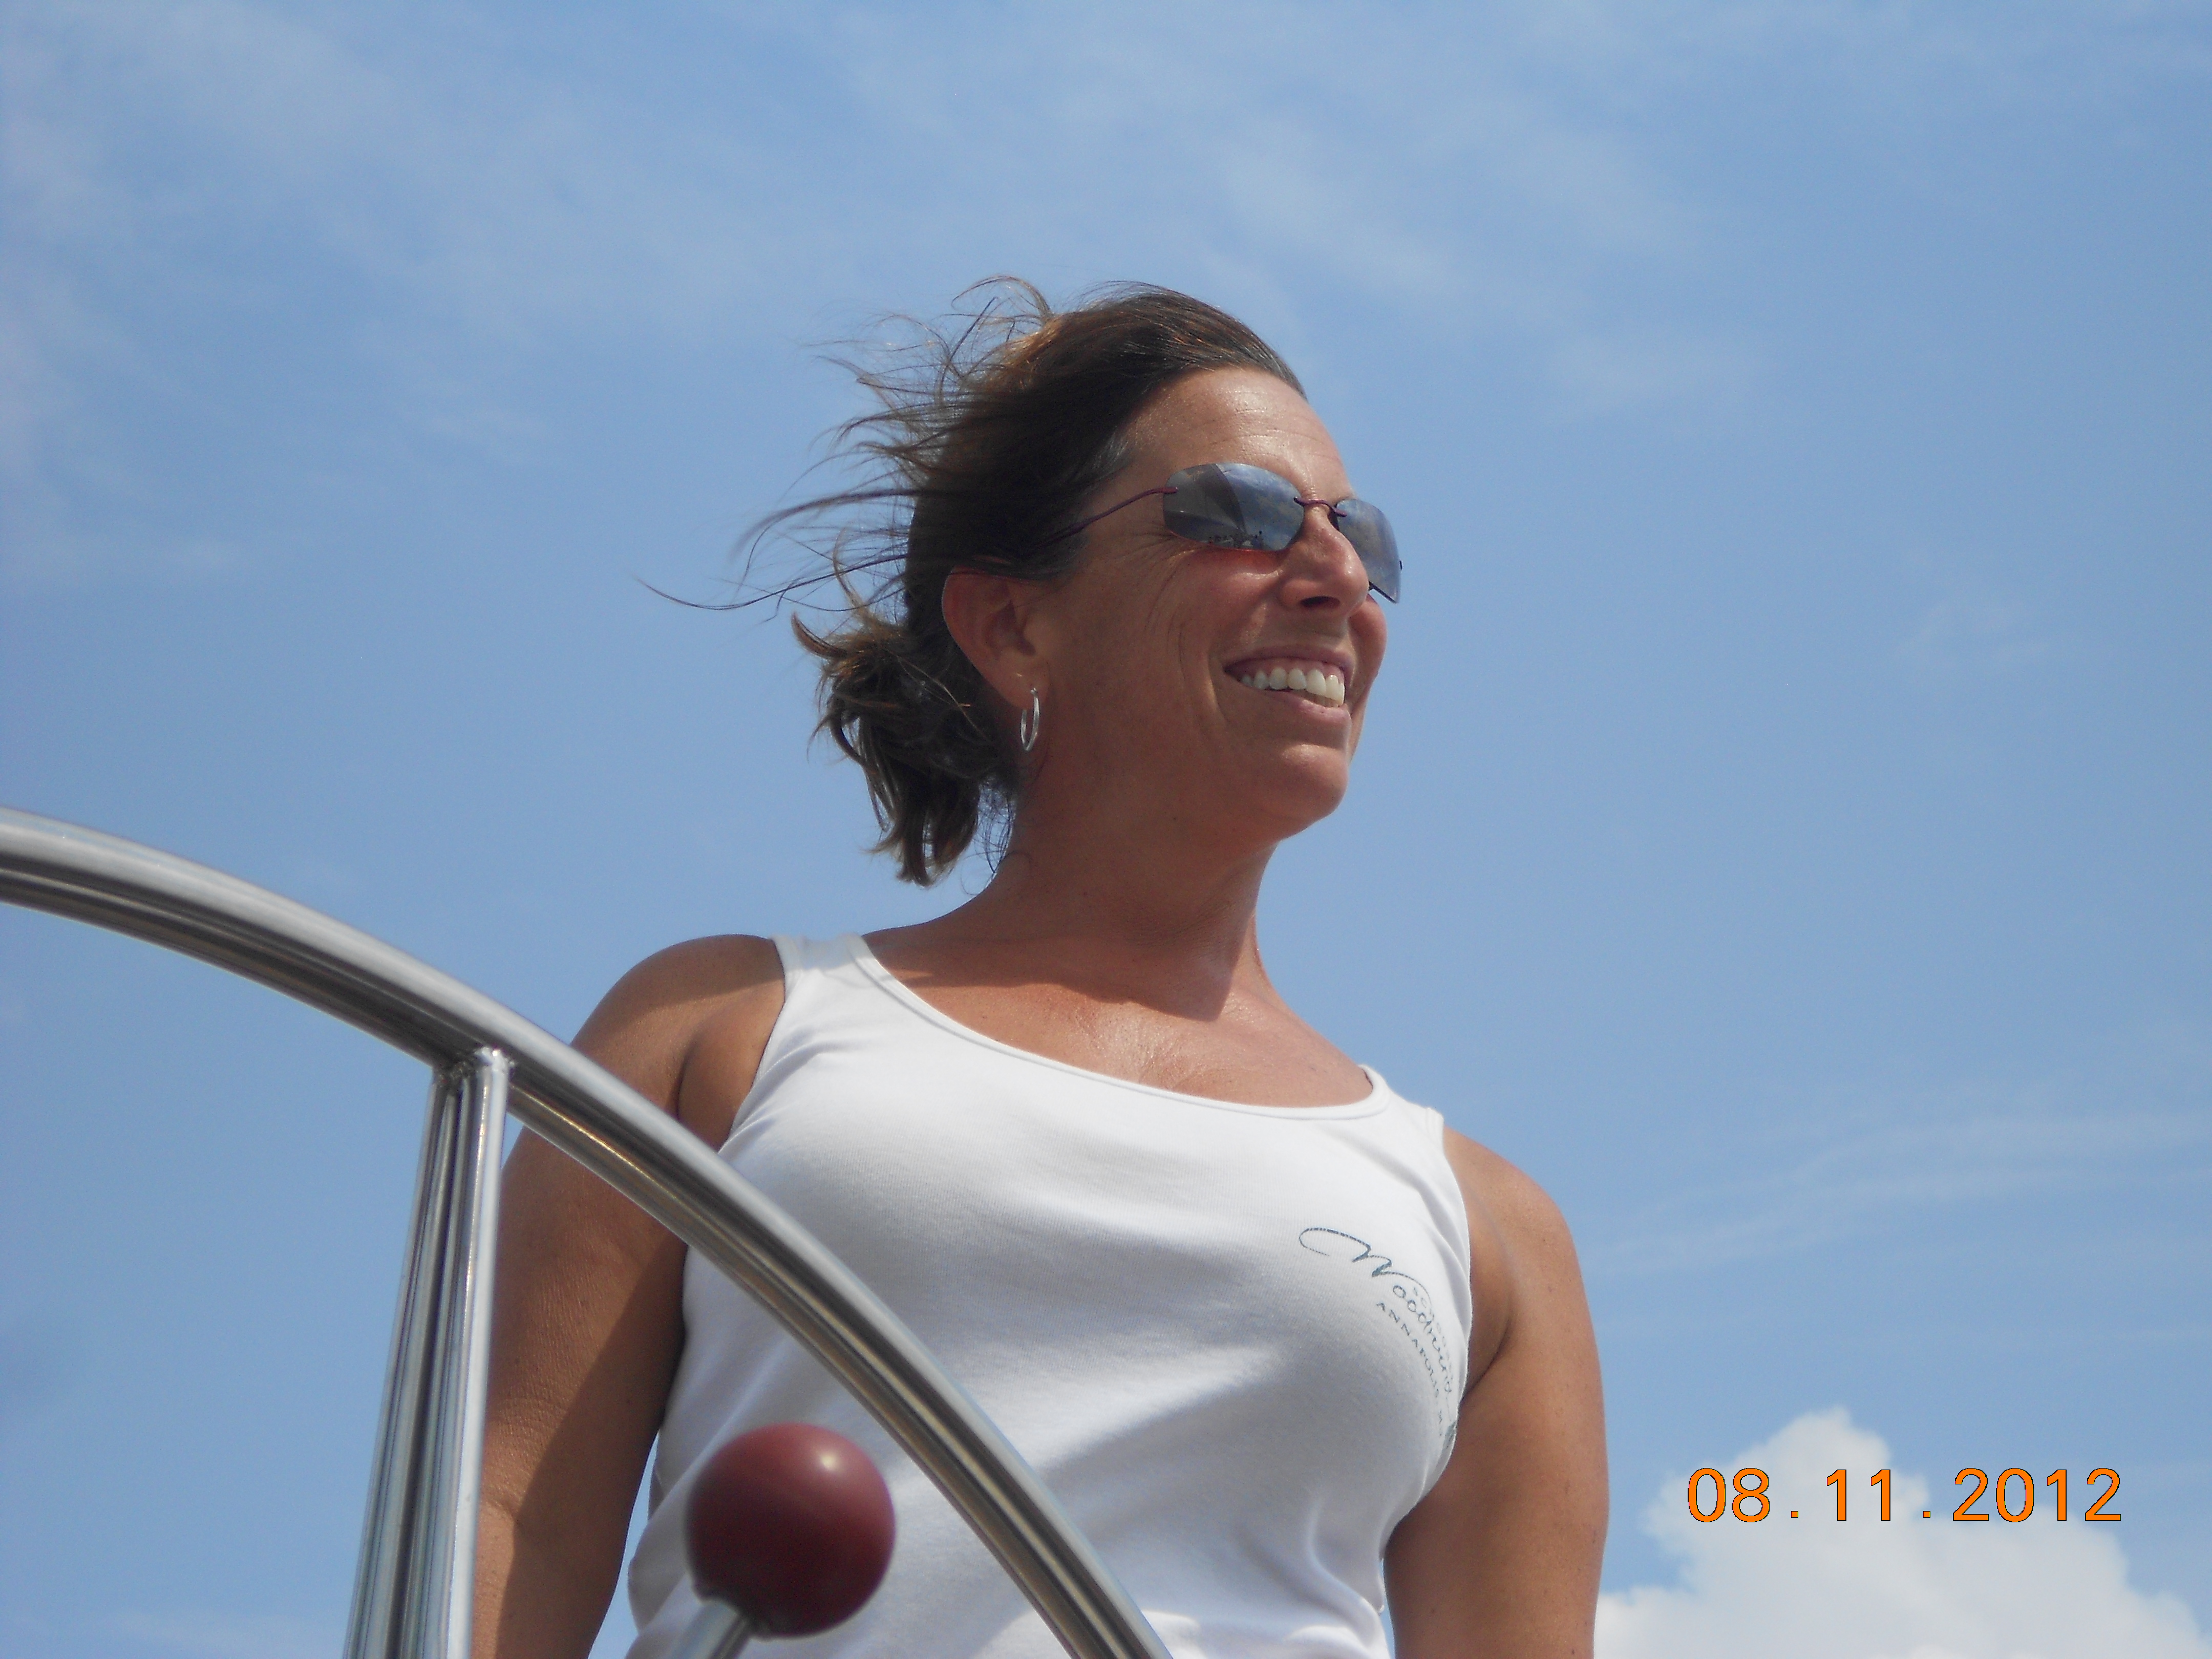 Great day for sailing on the Woodwind II with Captain Jen